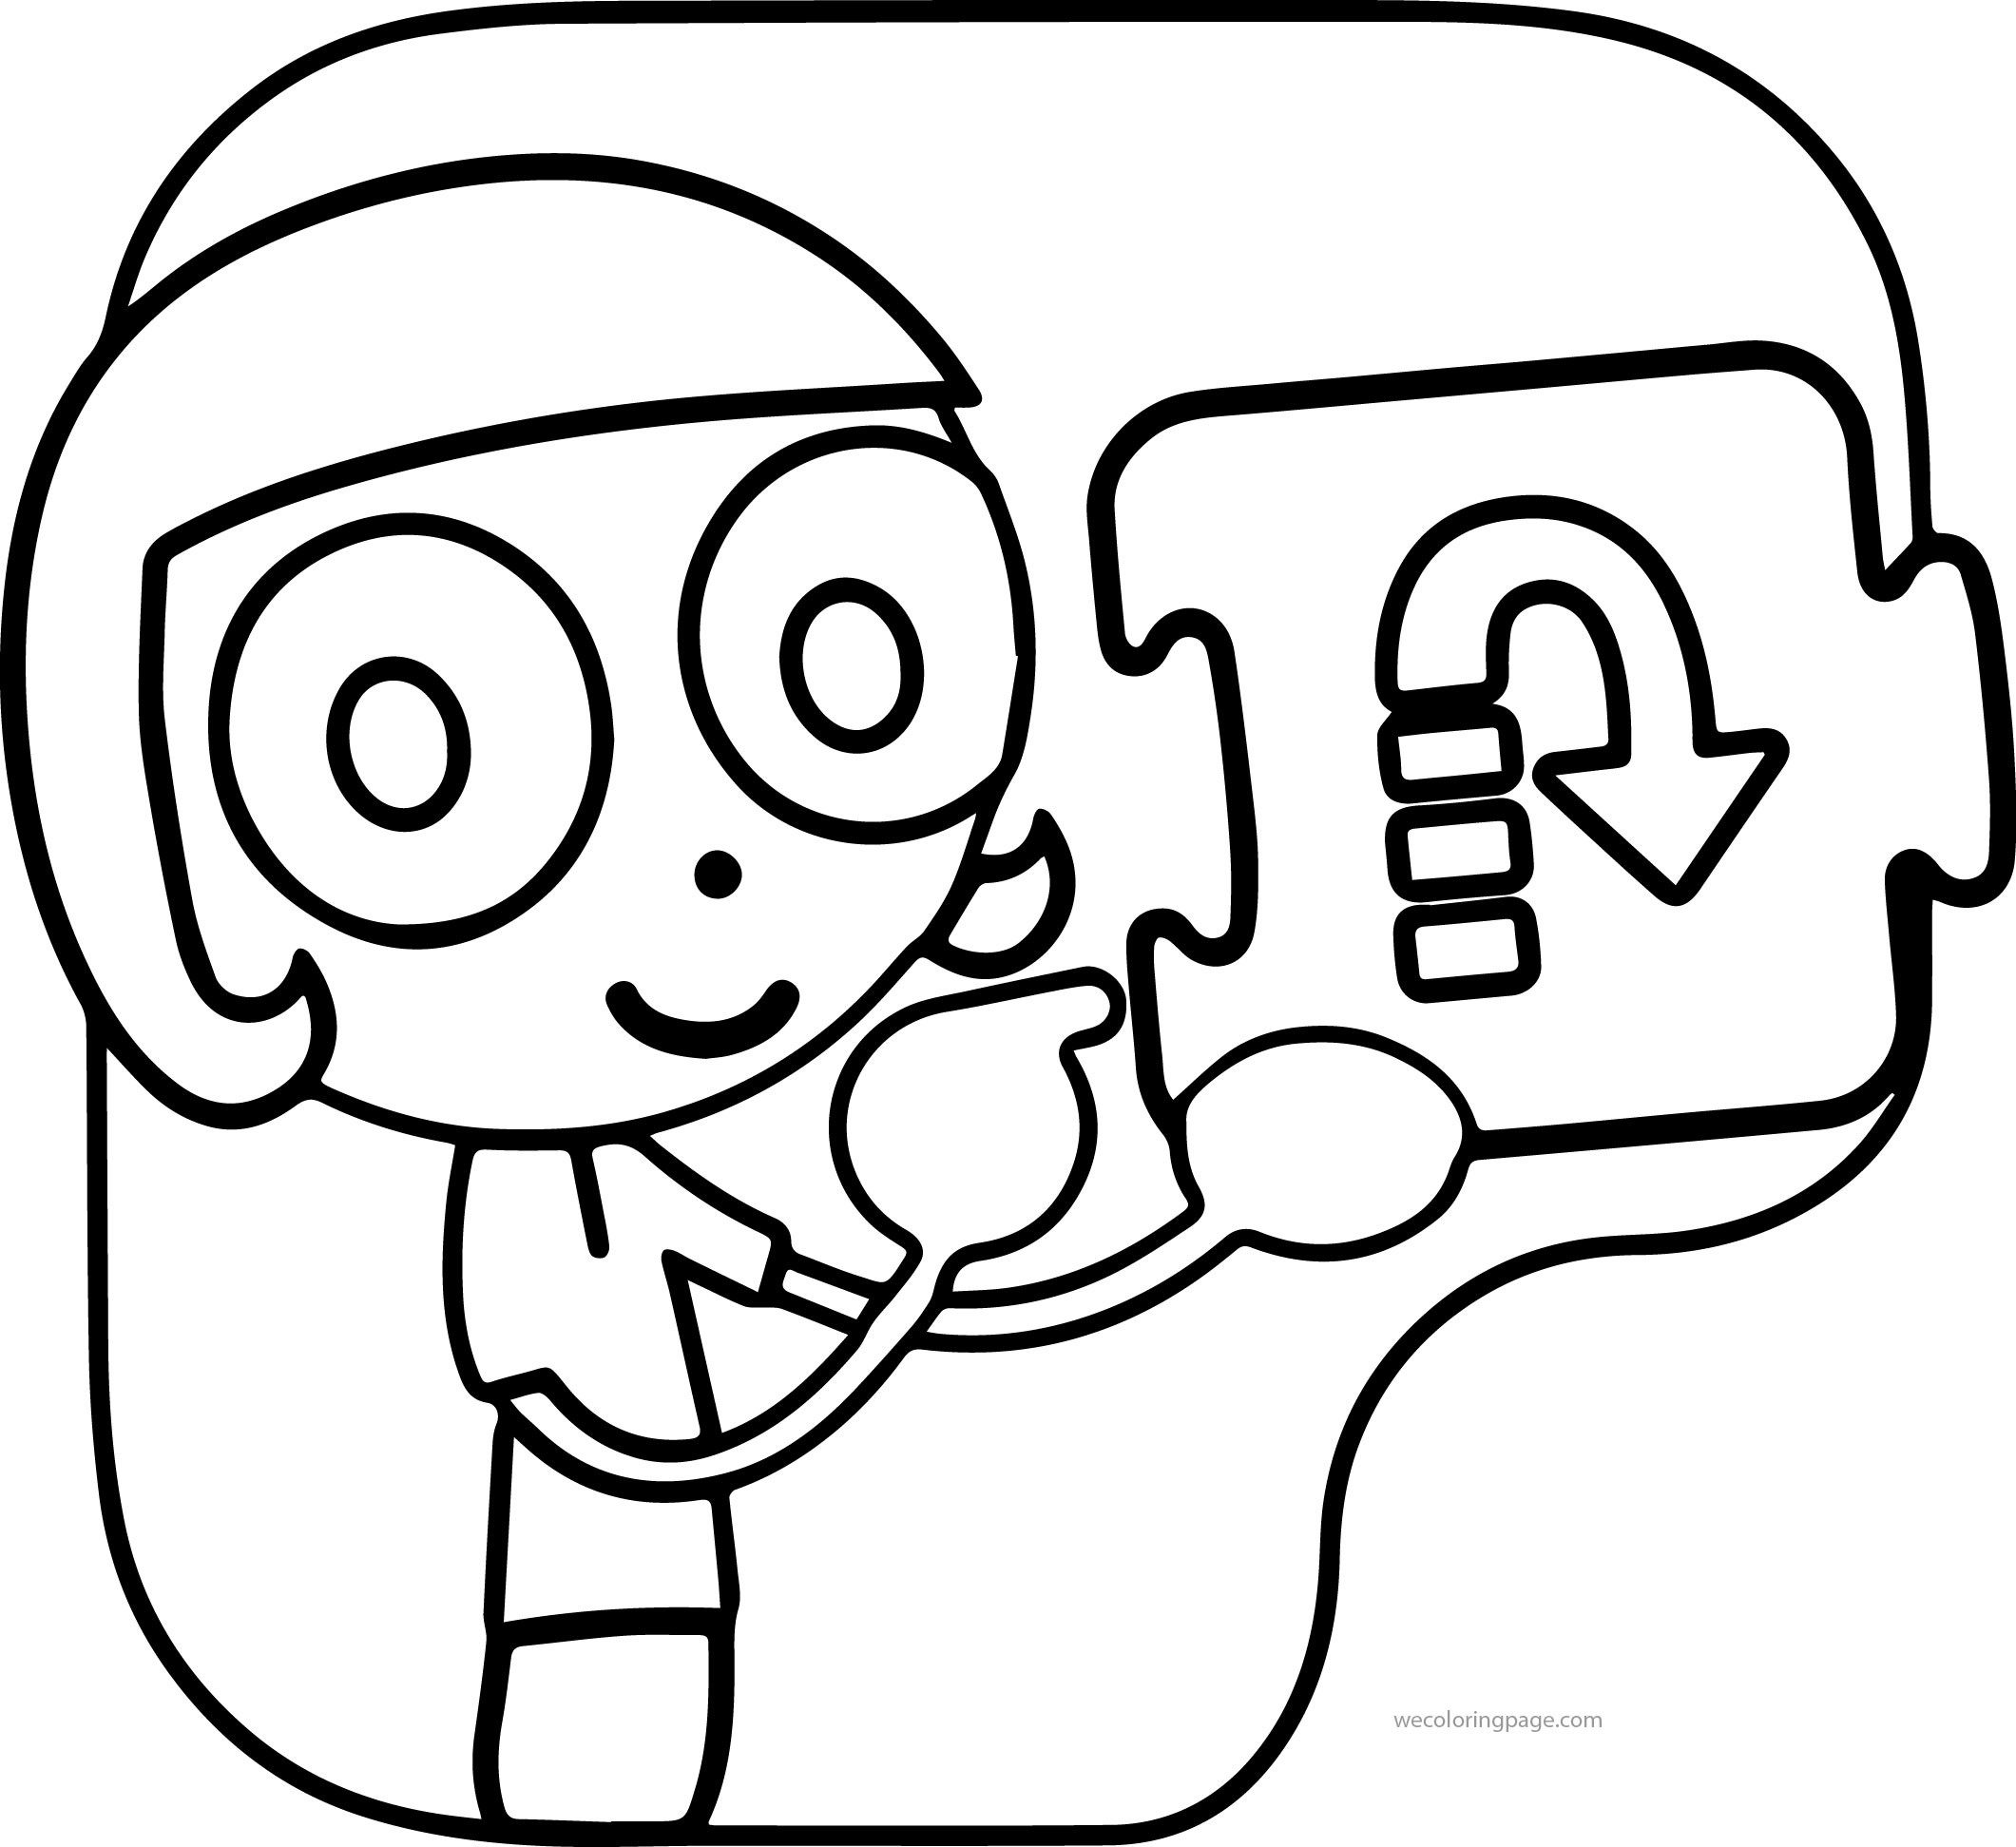 Pbskids.Org Coloring Pages
 Pbs Kids Girl Arrow Coloring Page